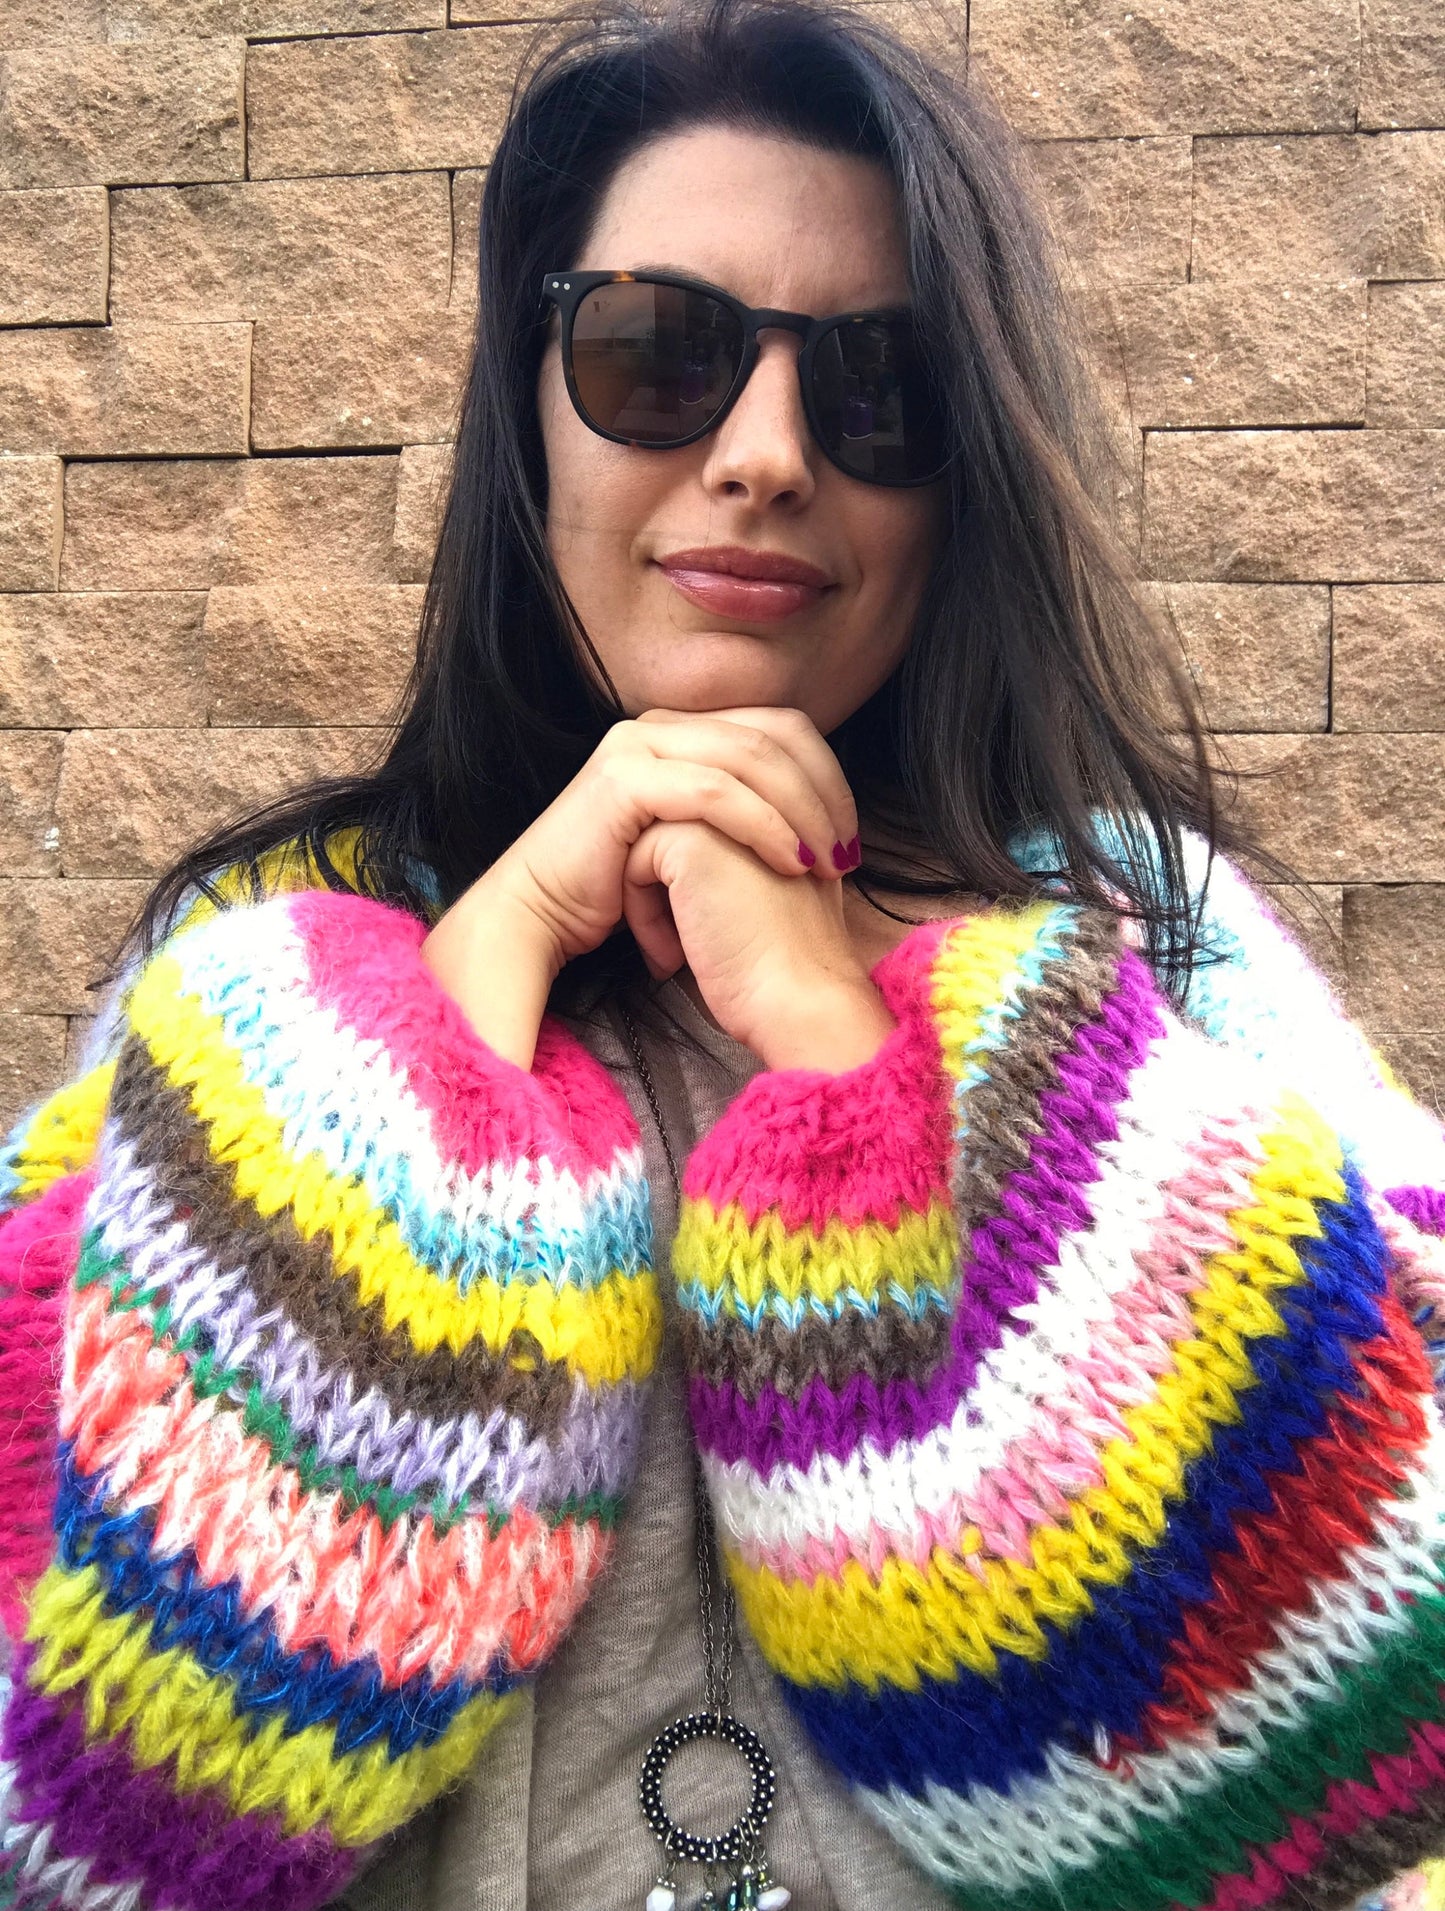 JOY Oversized Rainbow Cardigan, Hand Knit Jumper, Hand Knit Chunky Cardigan with Balloon Sleeves, Multicolor Sweater, Striped Cardigan